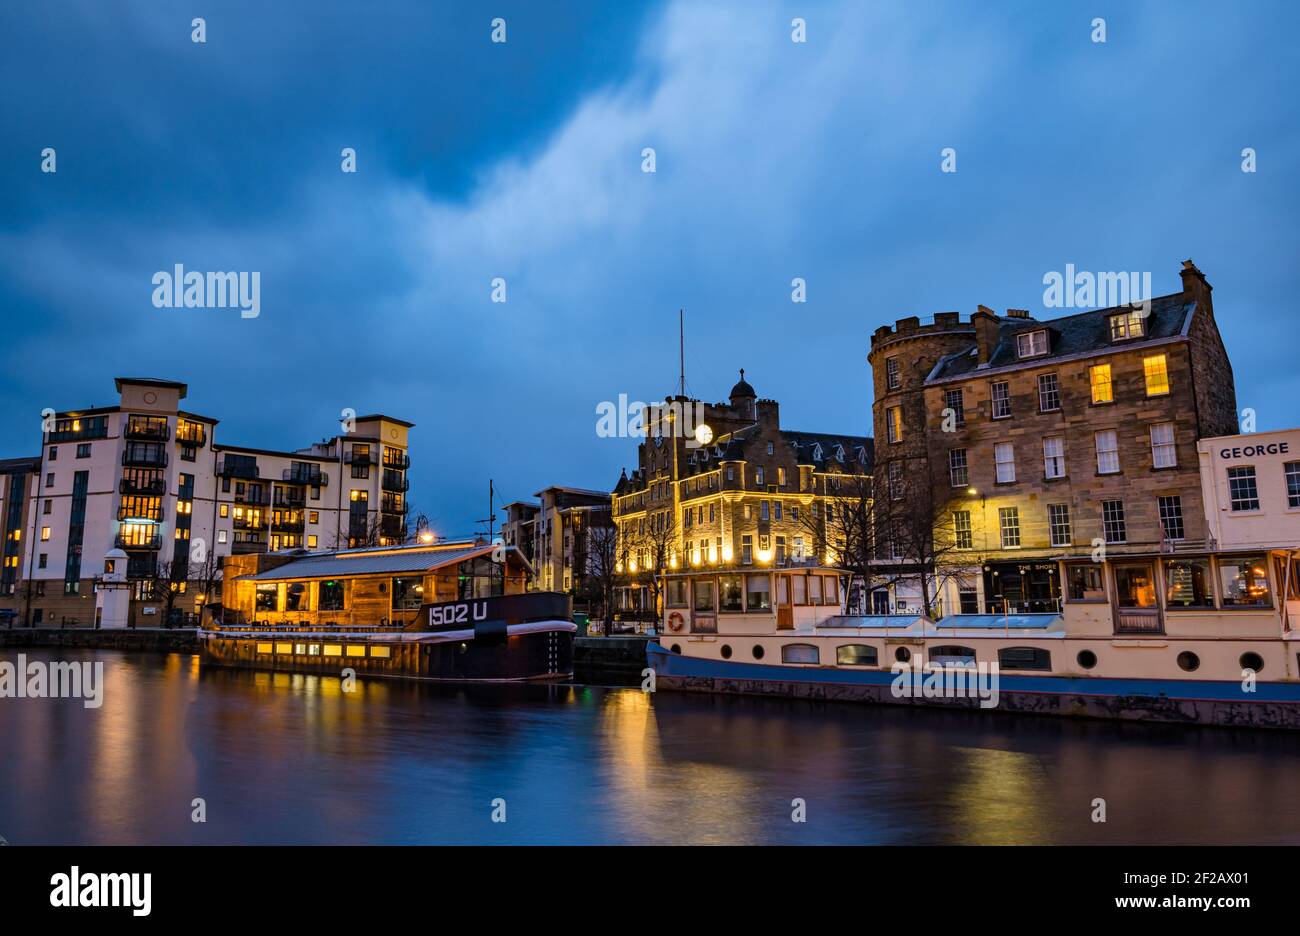 Barges, historic buildings, Malmaison Hotel & modern apartment block of flats lit up at night time, Water of Leith, The Shore, Edinburgh, Scotland, UK Stock Photo